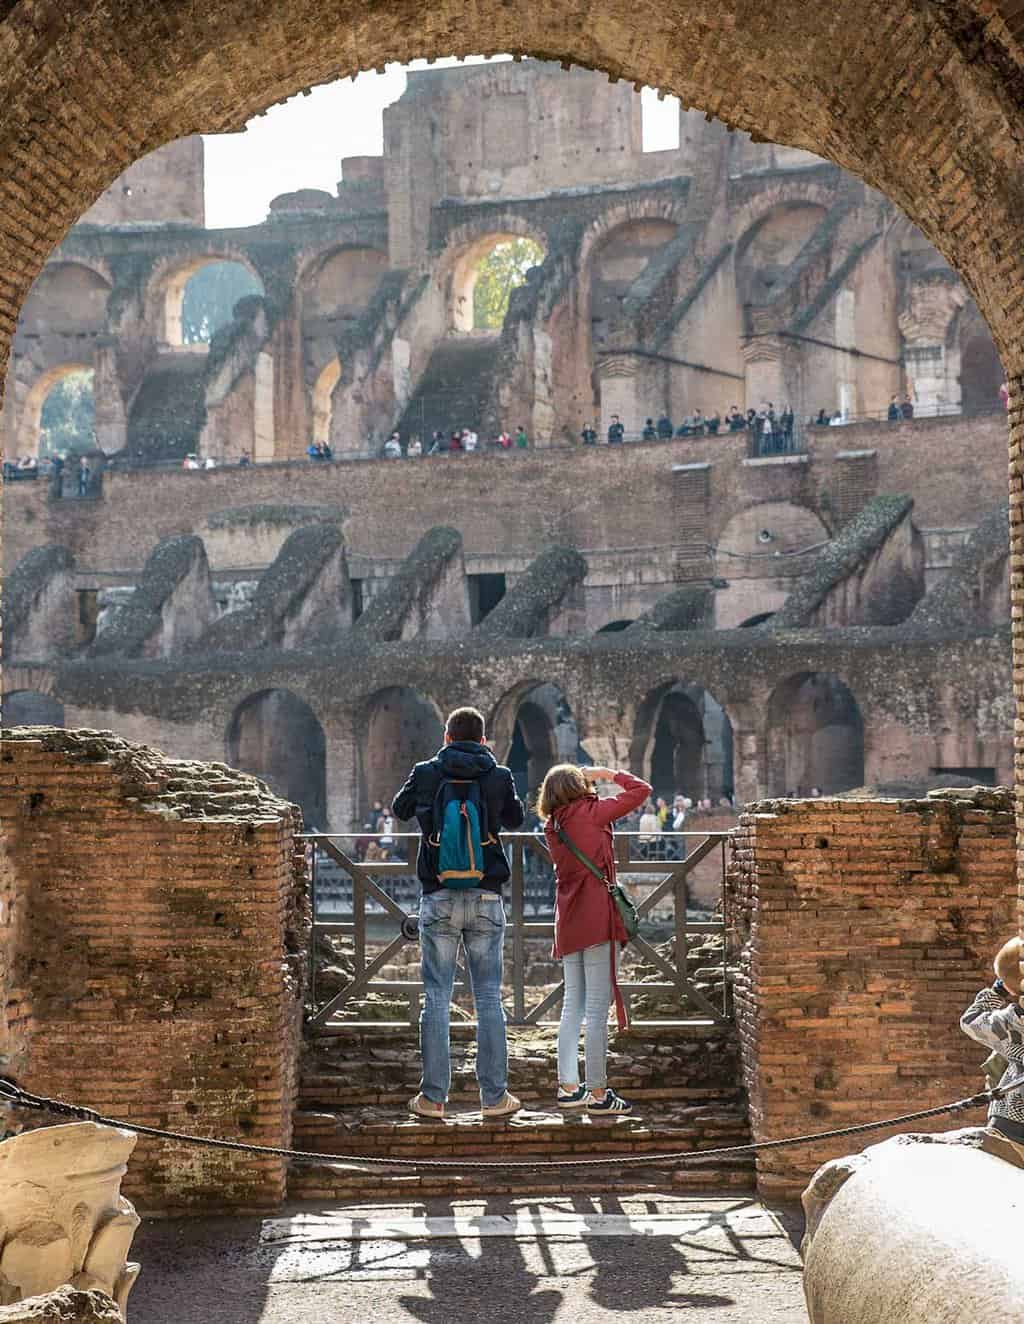 A man and woman tourists looking out over The Colosseum.